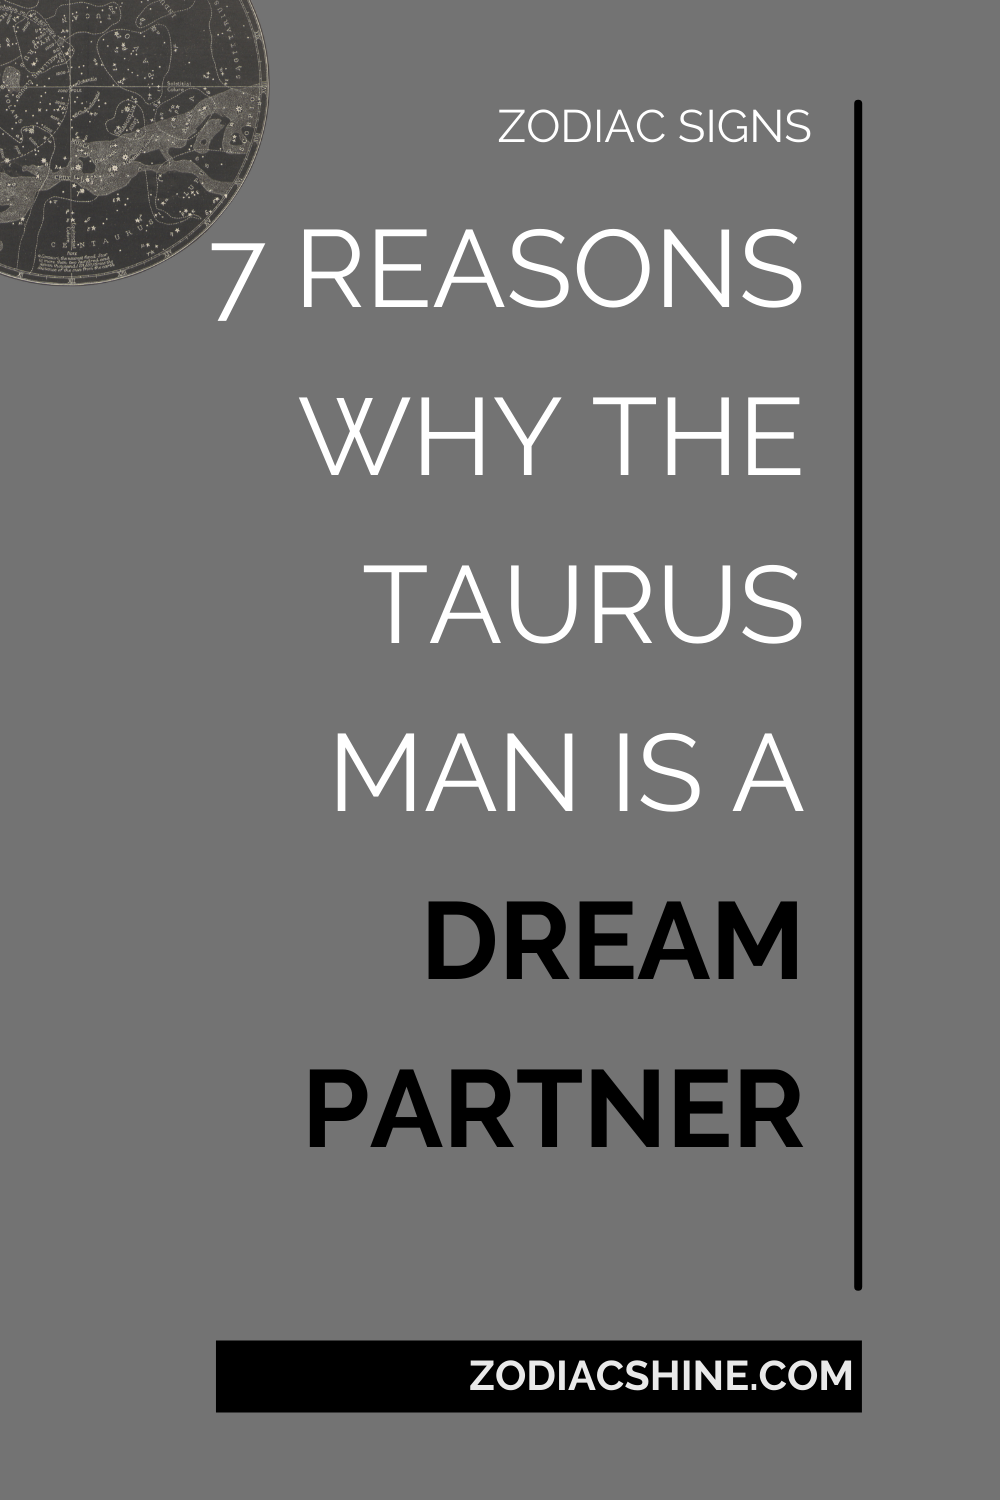 7 reasons why the Taurus man is a dream partner